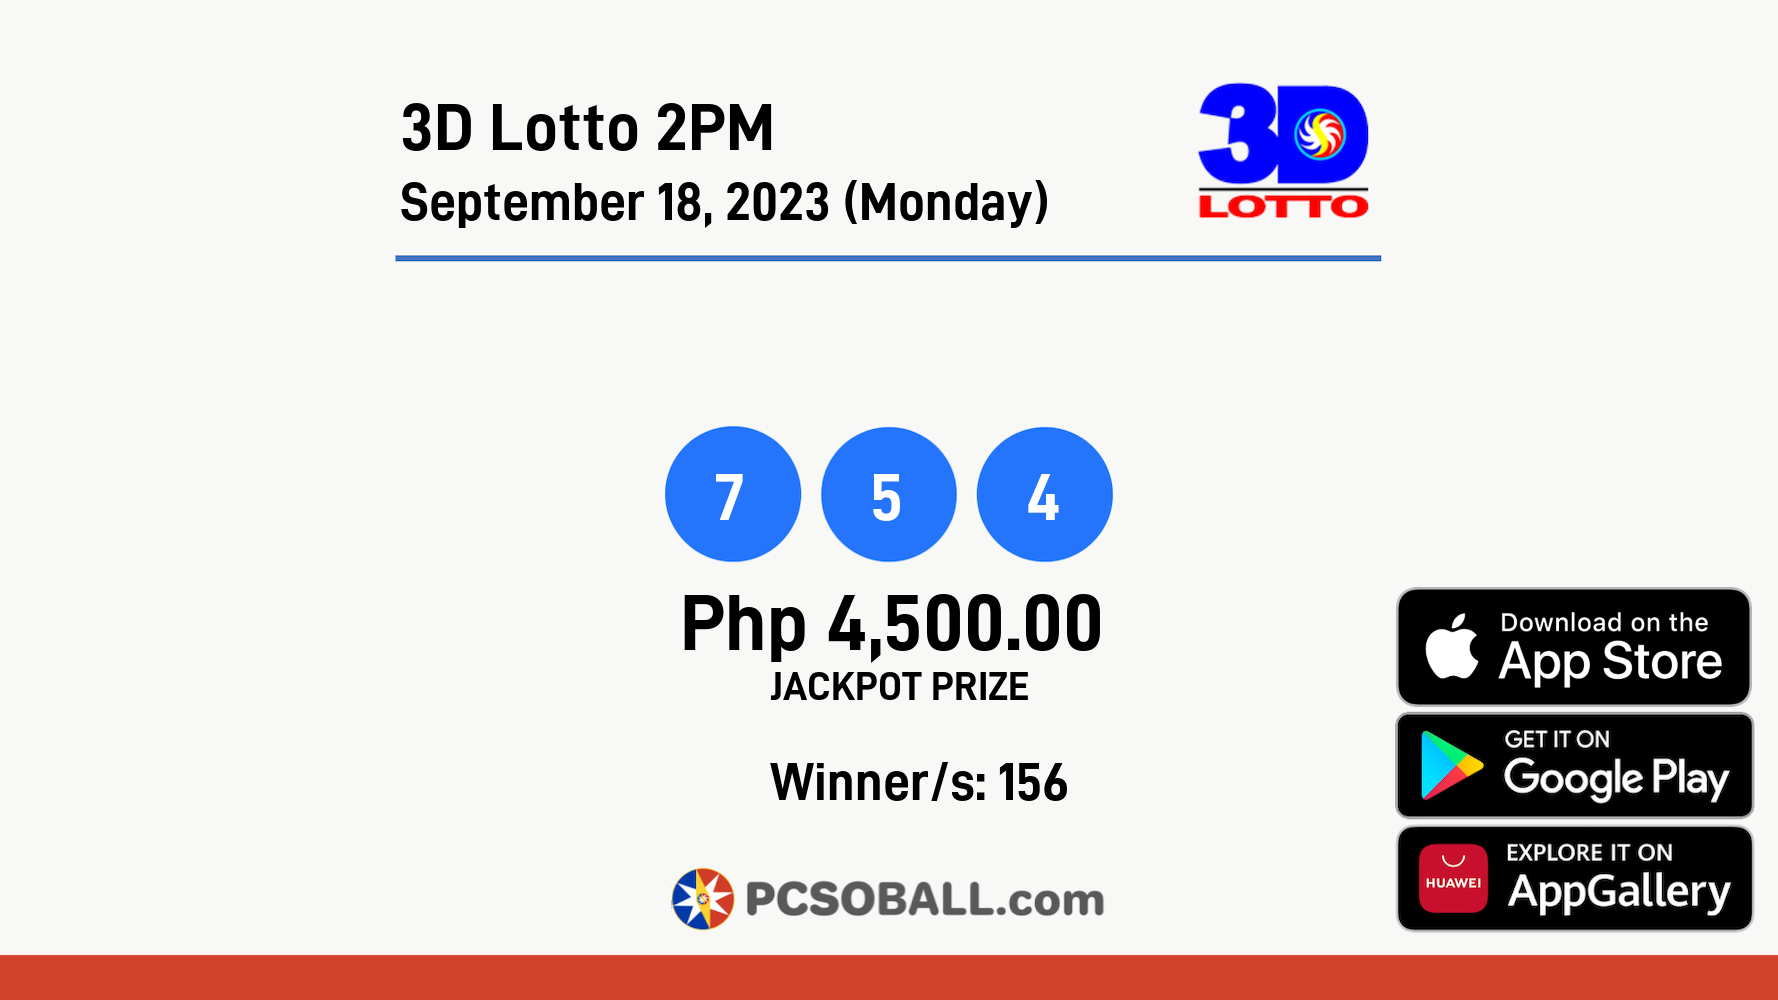 3D Lotto 2PM September 18, 2023 (Monday) Result